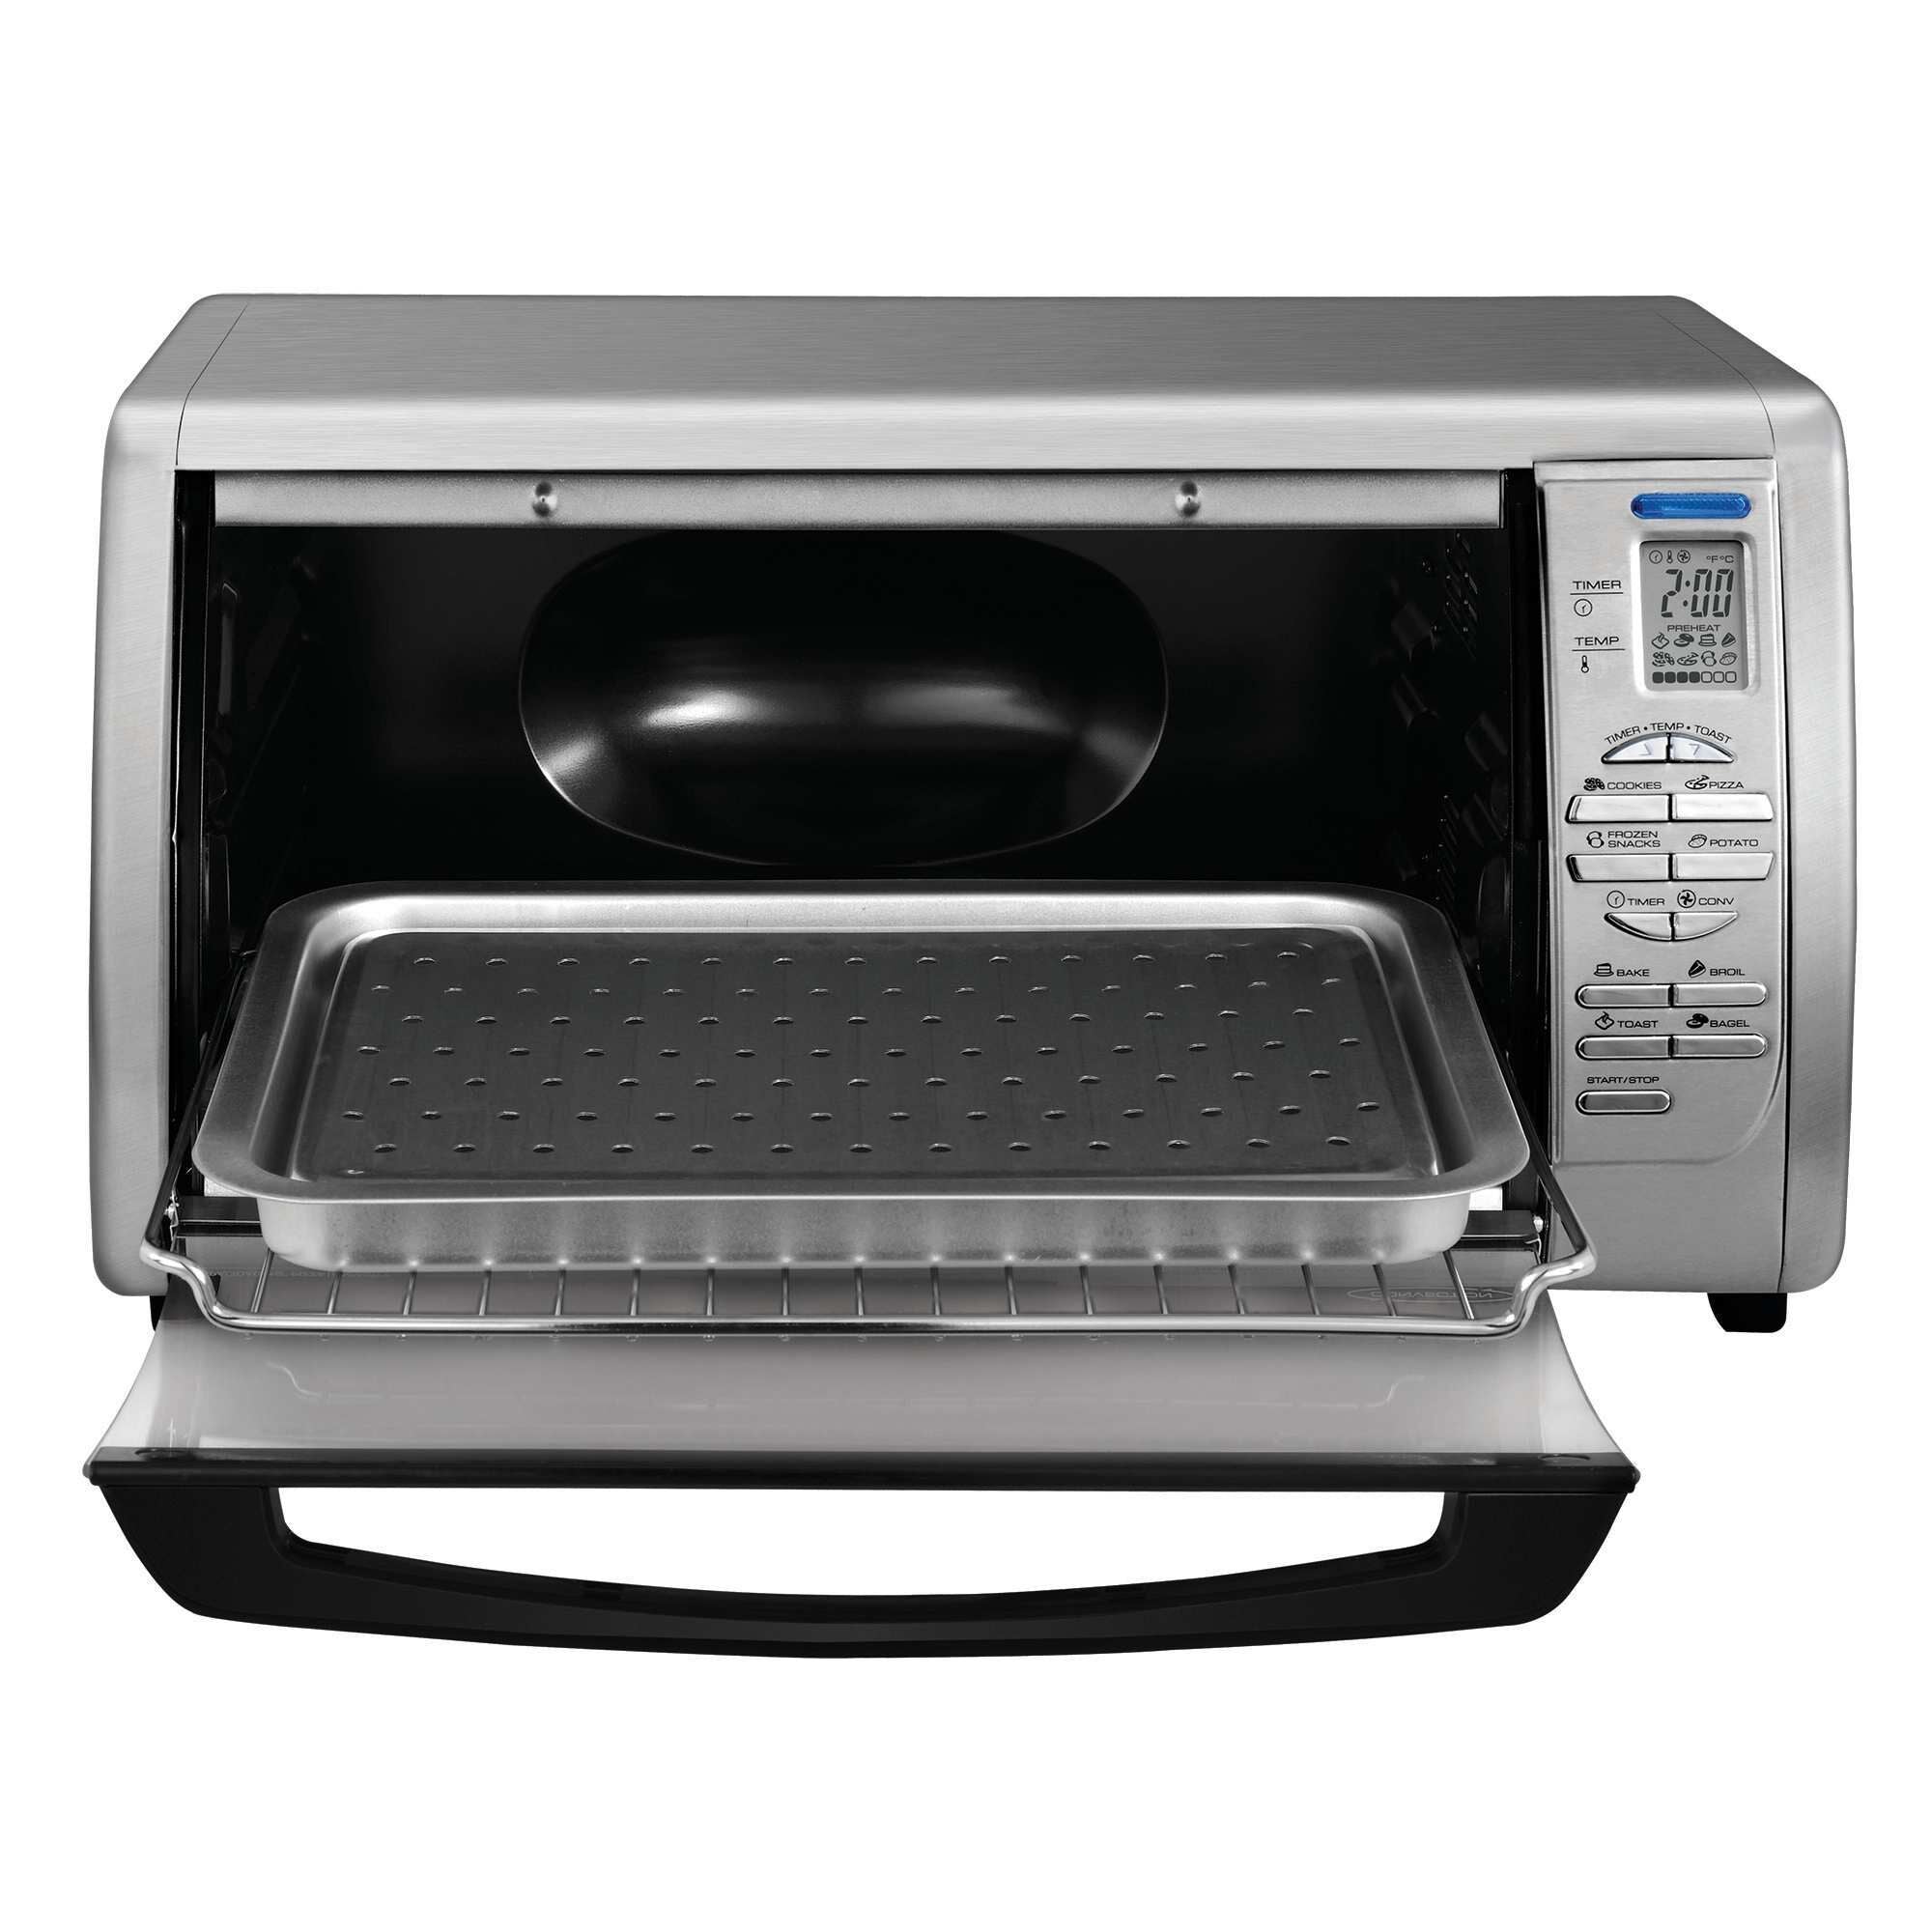 BLACK+DECKER CTO6335S Toaster Oven - Silver for sale online